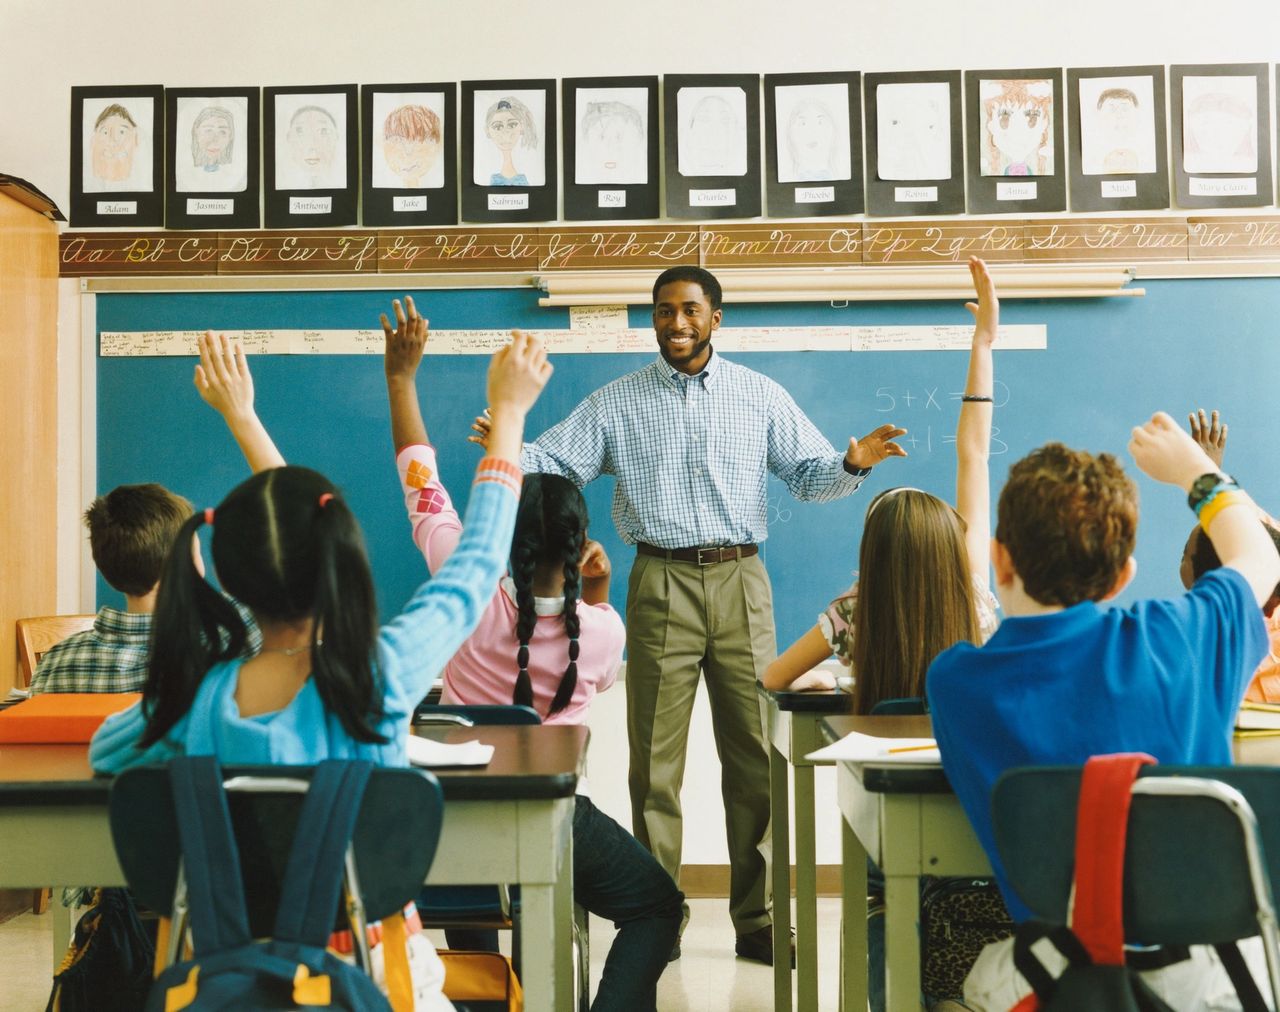 A teacher stands in front of the class with the chalk board behind him smiling as students eagerly raise their hands.